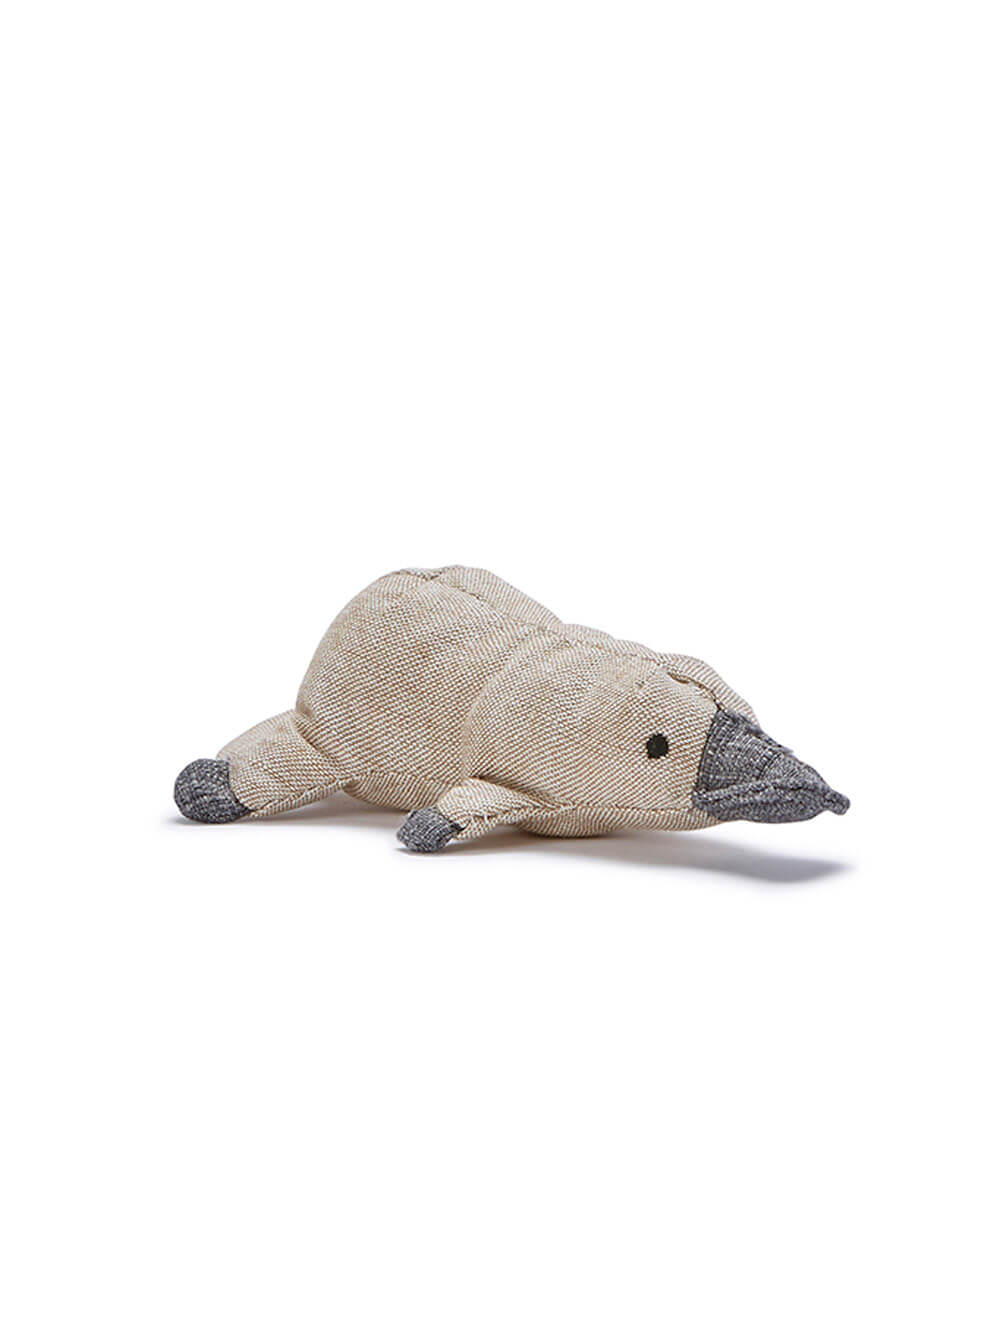 Nana Huchy Mini Pete Platypus Rattle | The Scouted co.